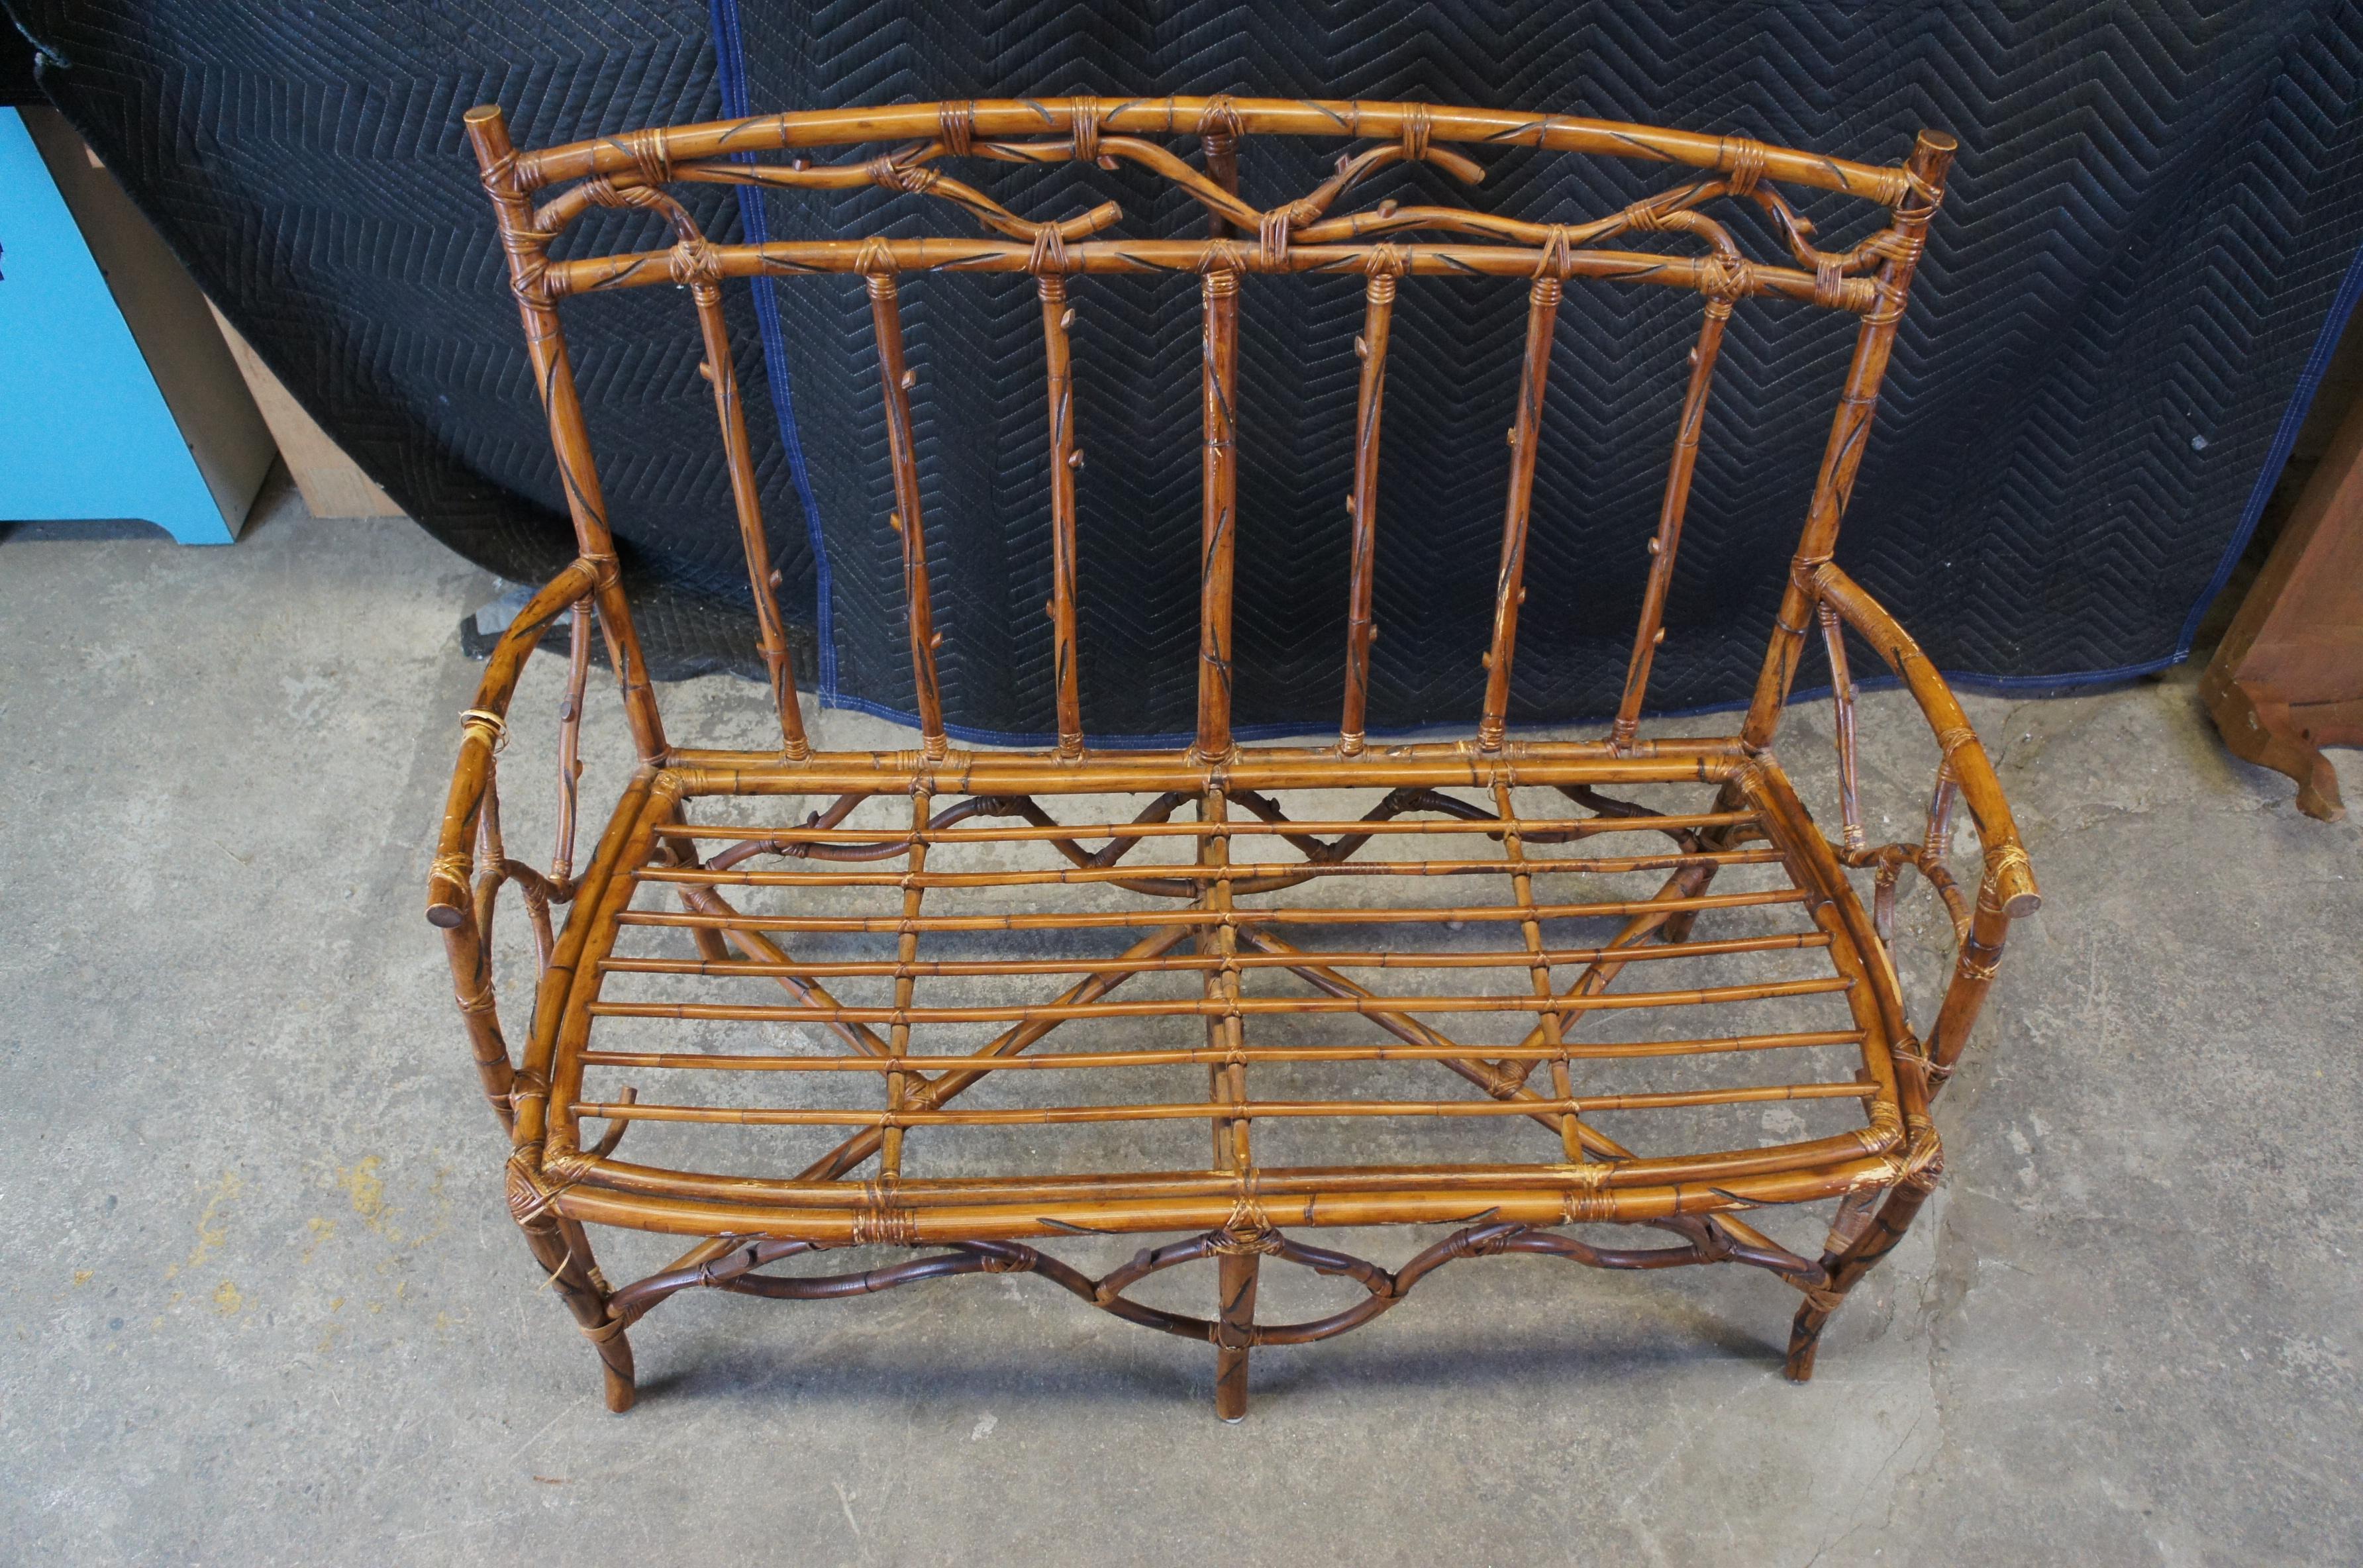 Vintage Rustic Bamboo Rattan Bent Wood Adirondak Tree Branch Bench Settee In Good Condition For Sale In Dayton, OH